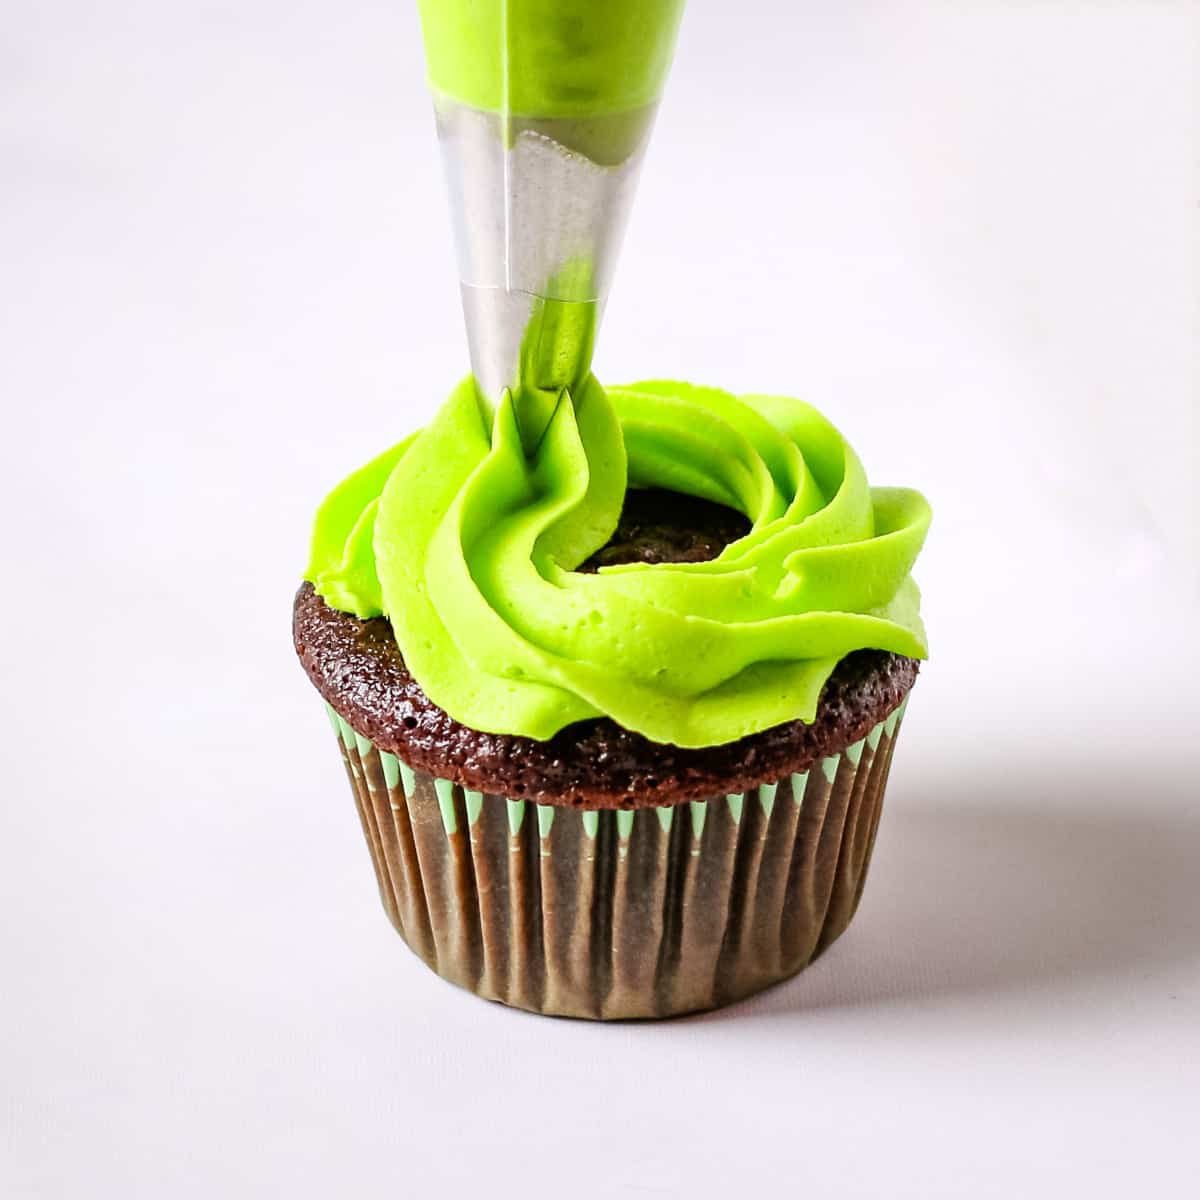 Piping a green buttercream swirl on top of a chocolate cupcake.